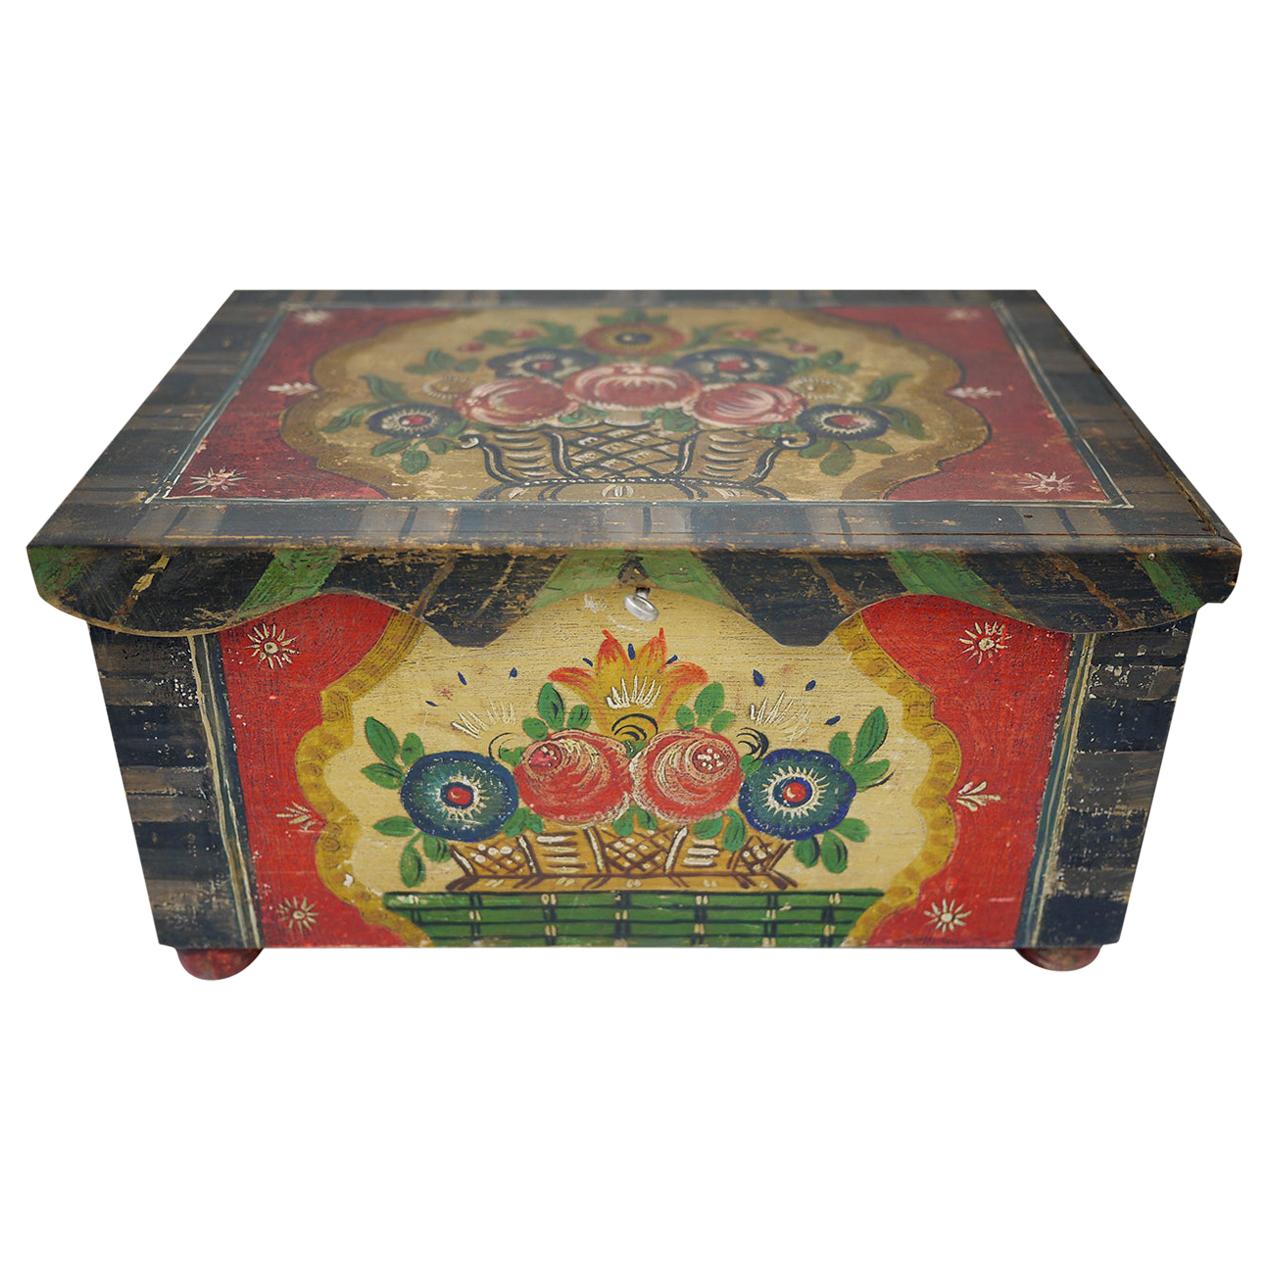 Painted Wooden Box, Early 20th Century